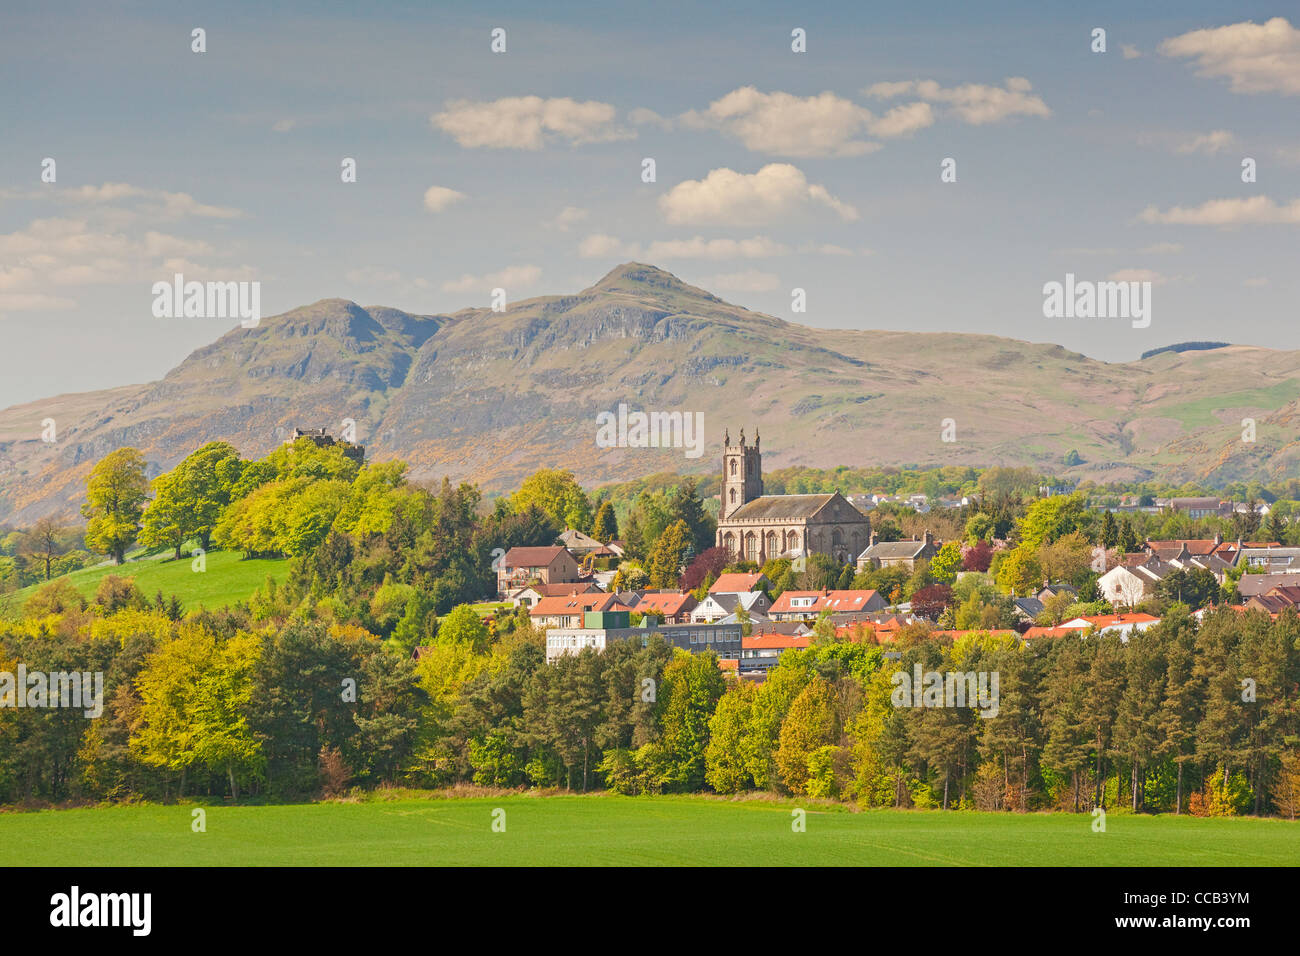 Clackmannan showing the Parish Church. Dumyat is in the background. Stock Photo